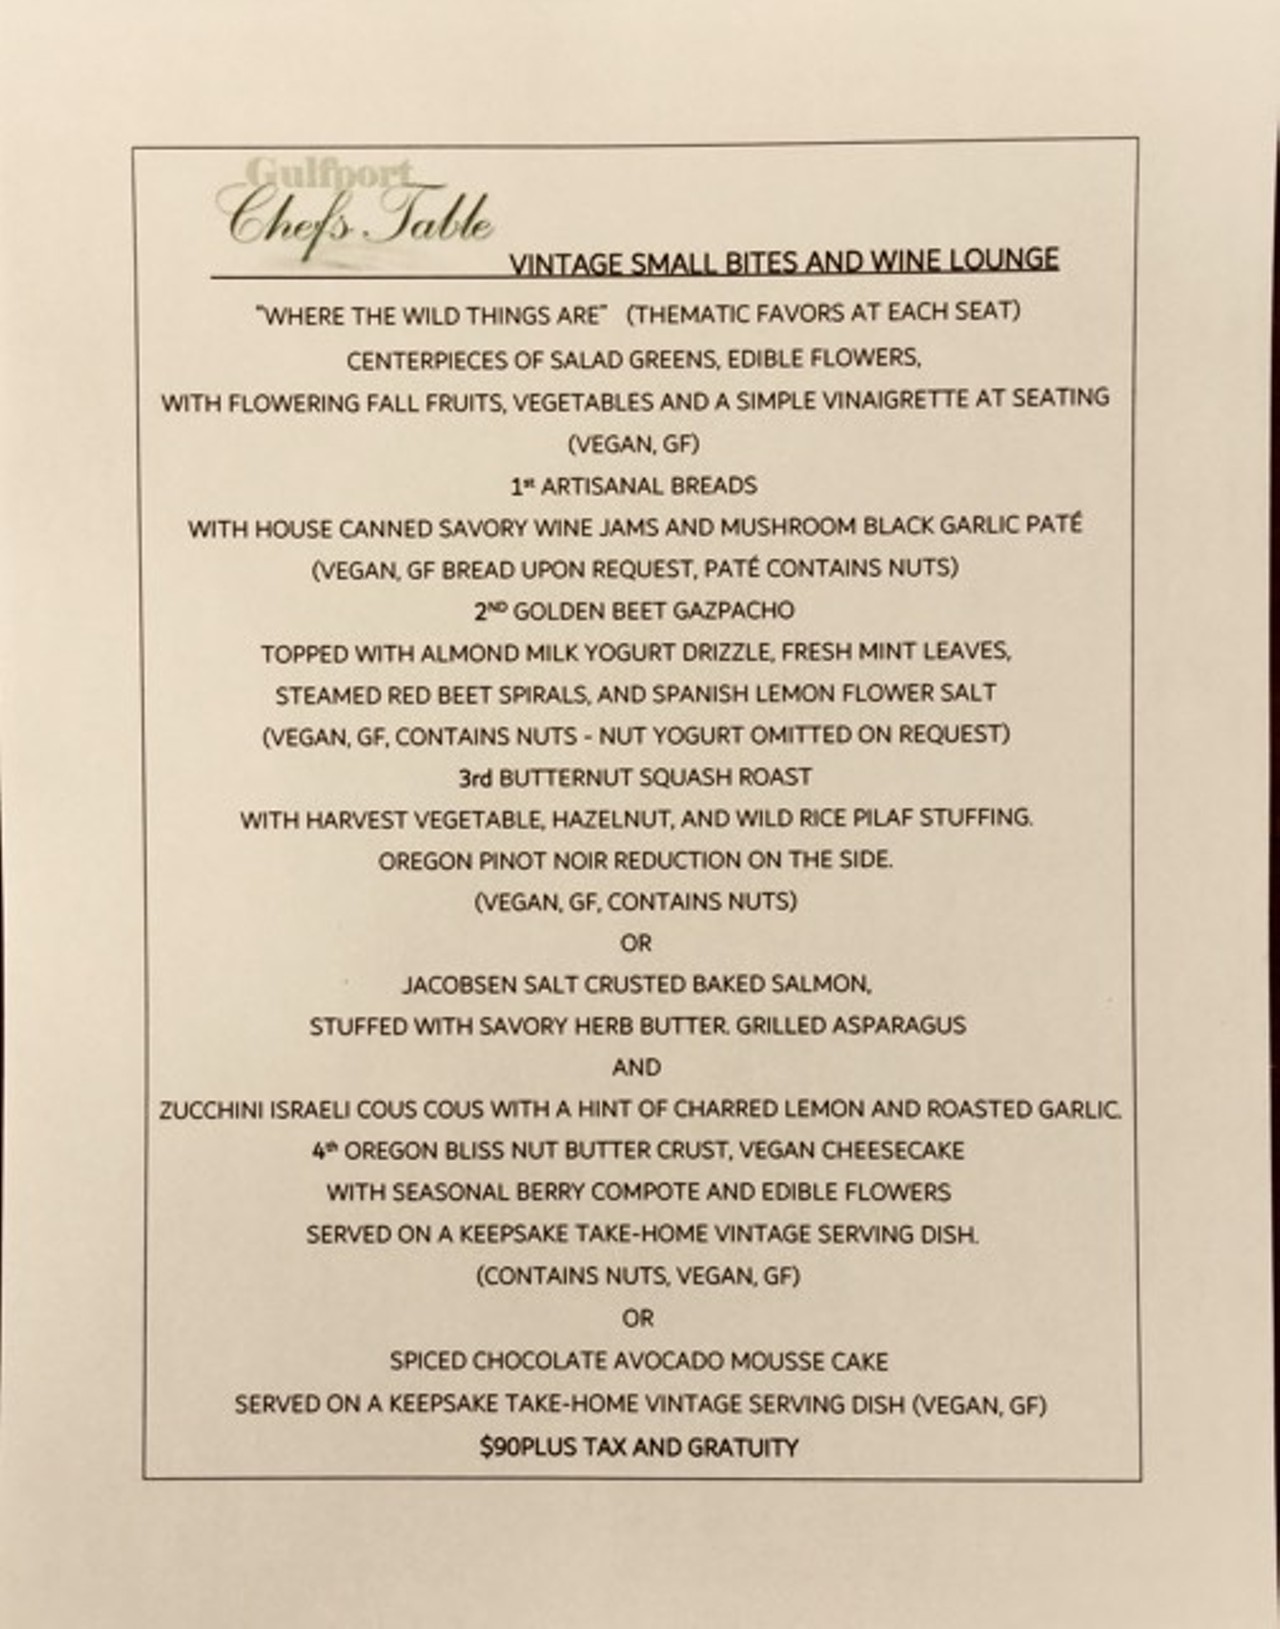 Gulfport Chef's Table 2018 Vintage Small Bites and Wine Lounge menu